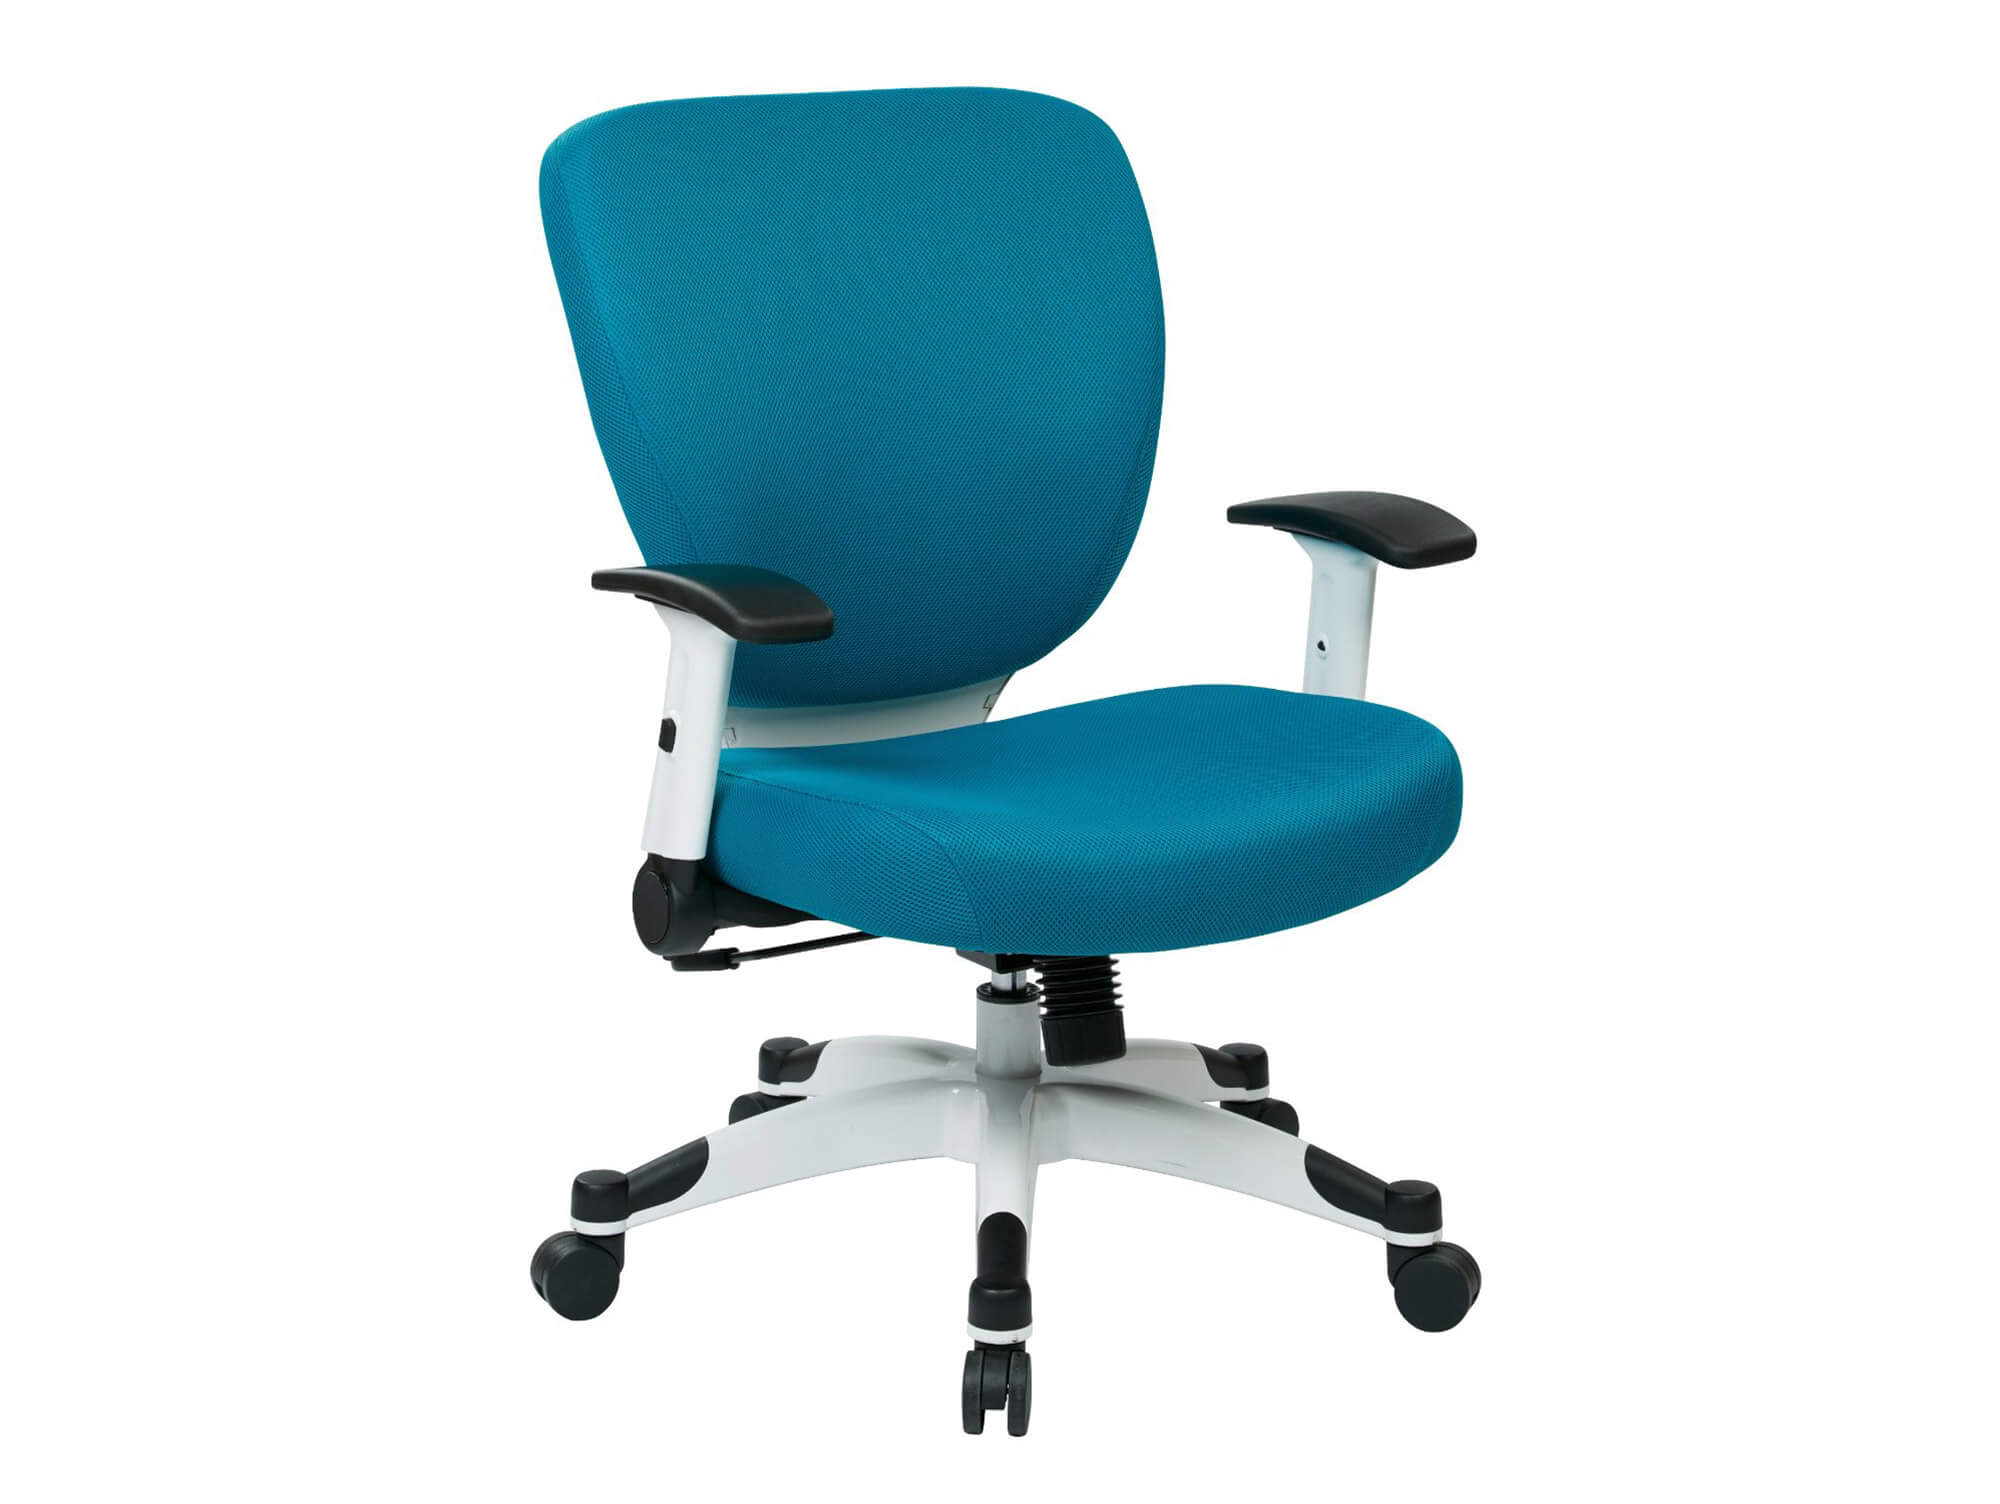 chairs-for-office-blue-desk-chair.jpg